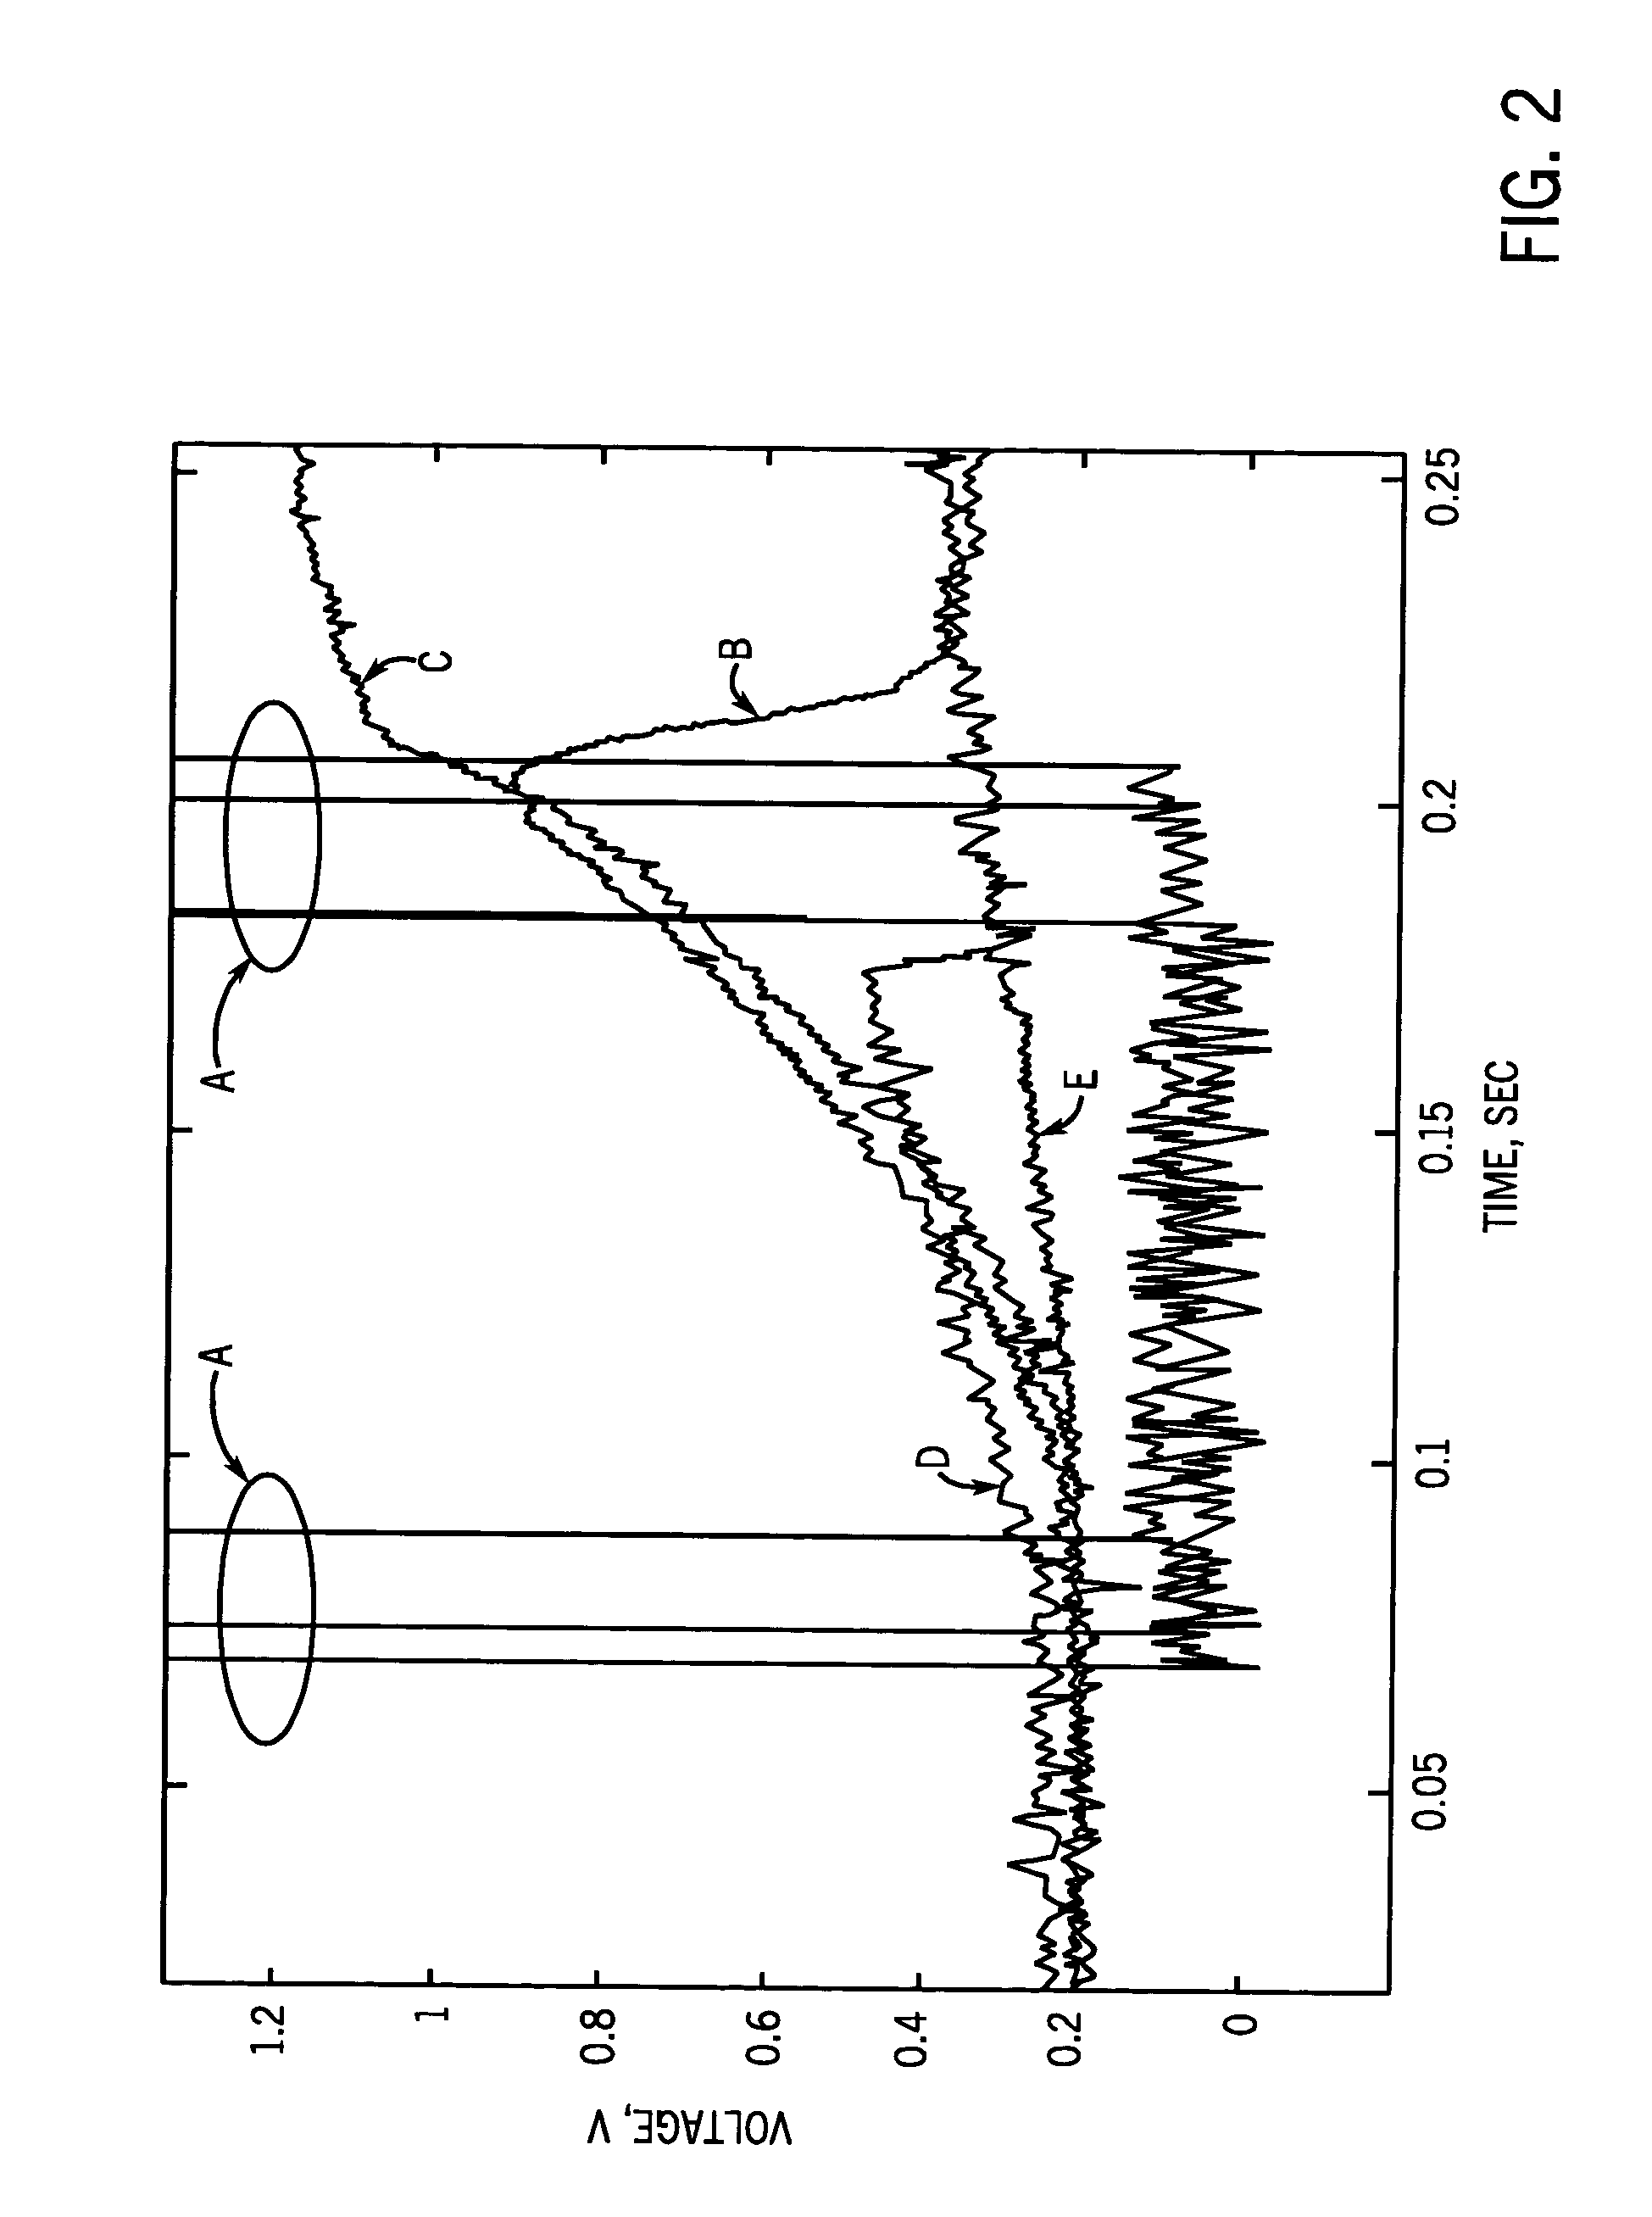 Method for discriminating between operating conditions in medical pump